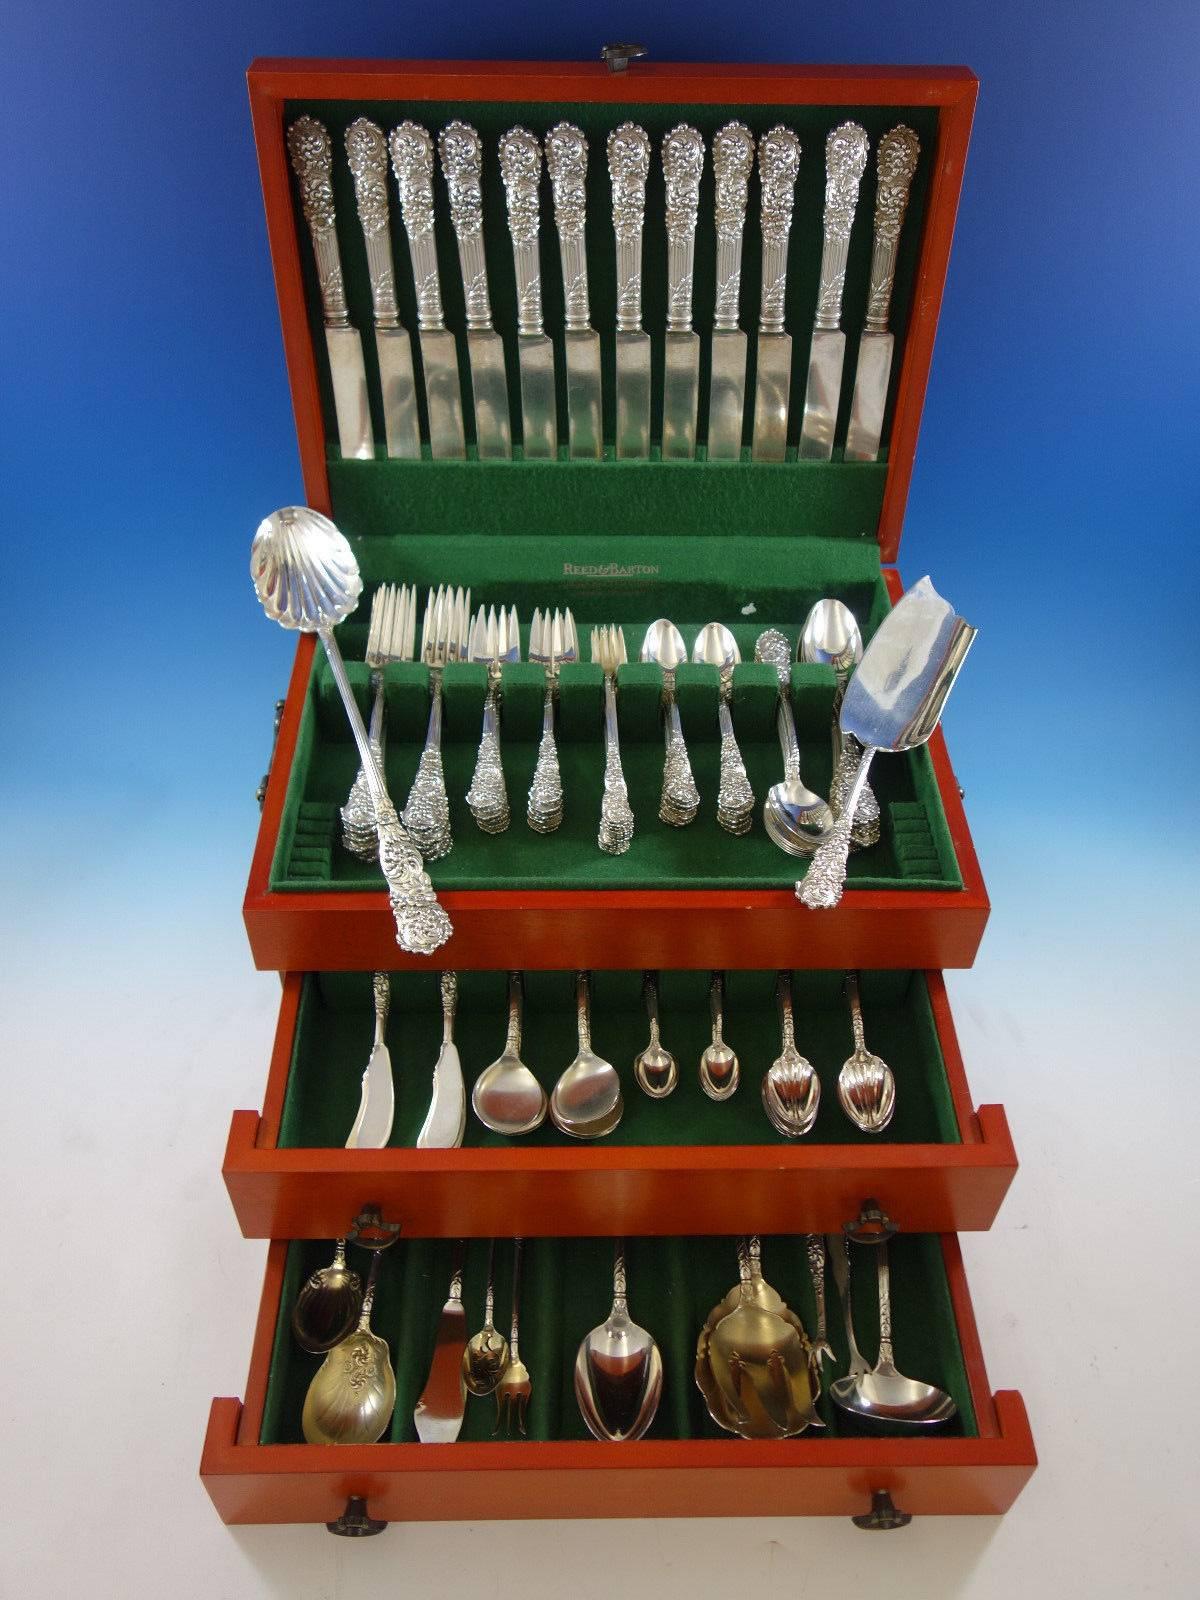 Trajan by Reed and Barton sterling silver flatware set with Rococo design - 132 pieces. This set includes: 

12 dinner size knives, 10 1/8